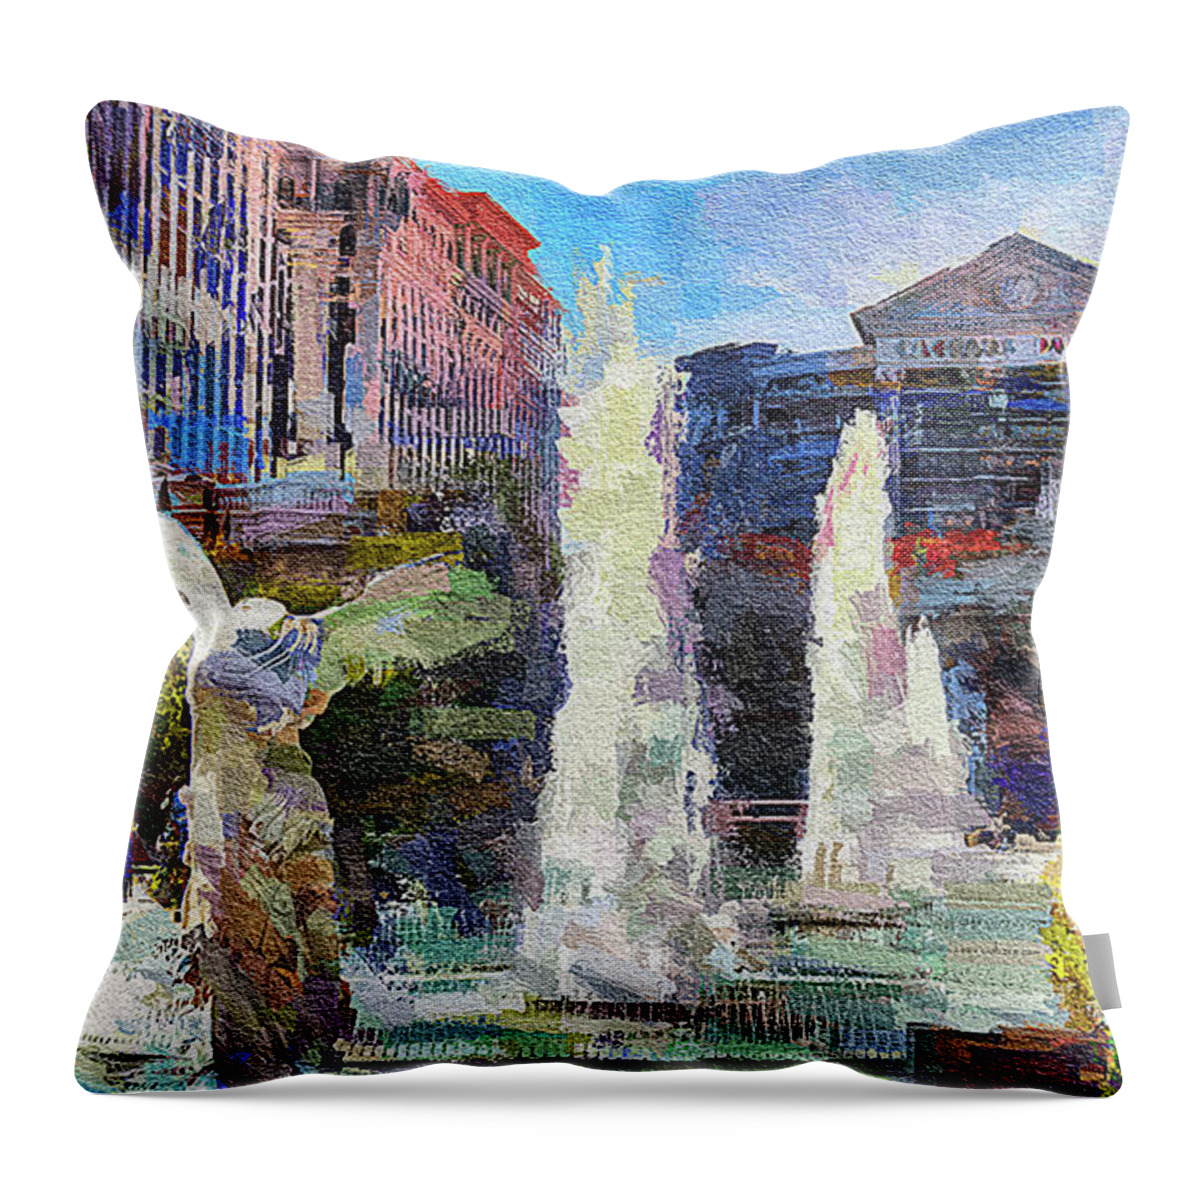 Caesars Palace Fountains Throw Pillow featuring the photograph Caesars Palace Fountains, Las Vegas by Tatiana Travelways